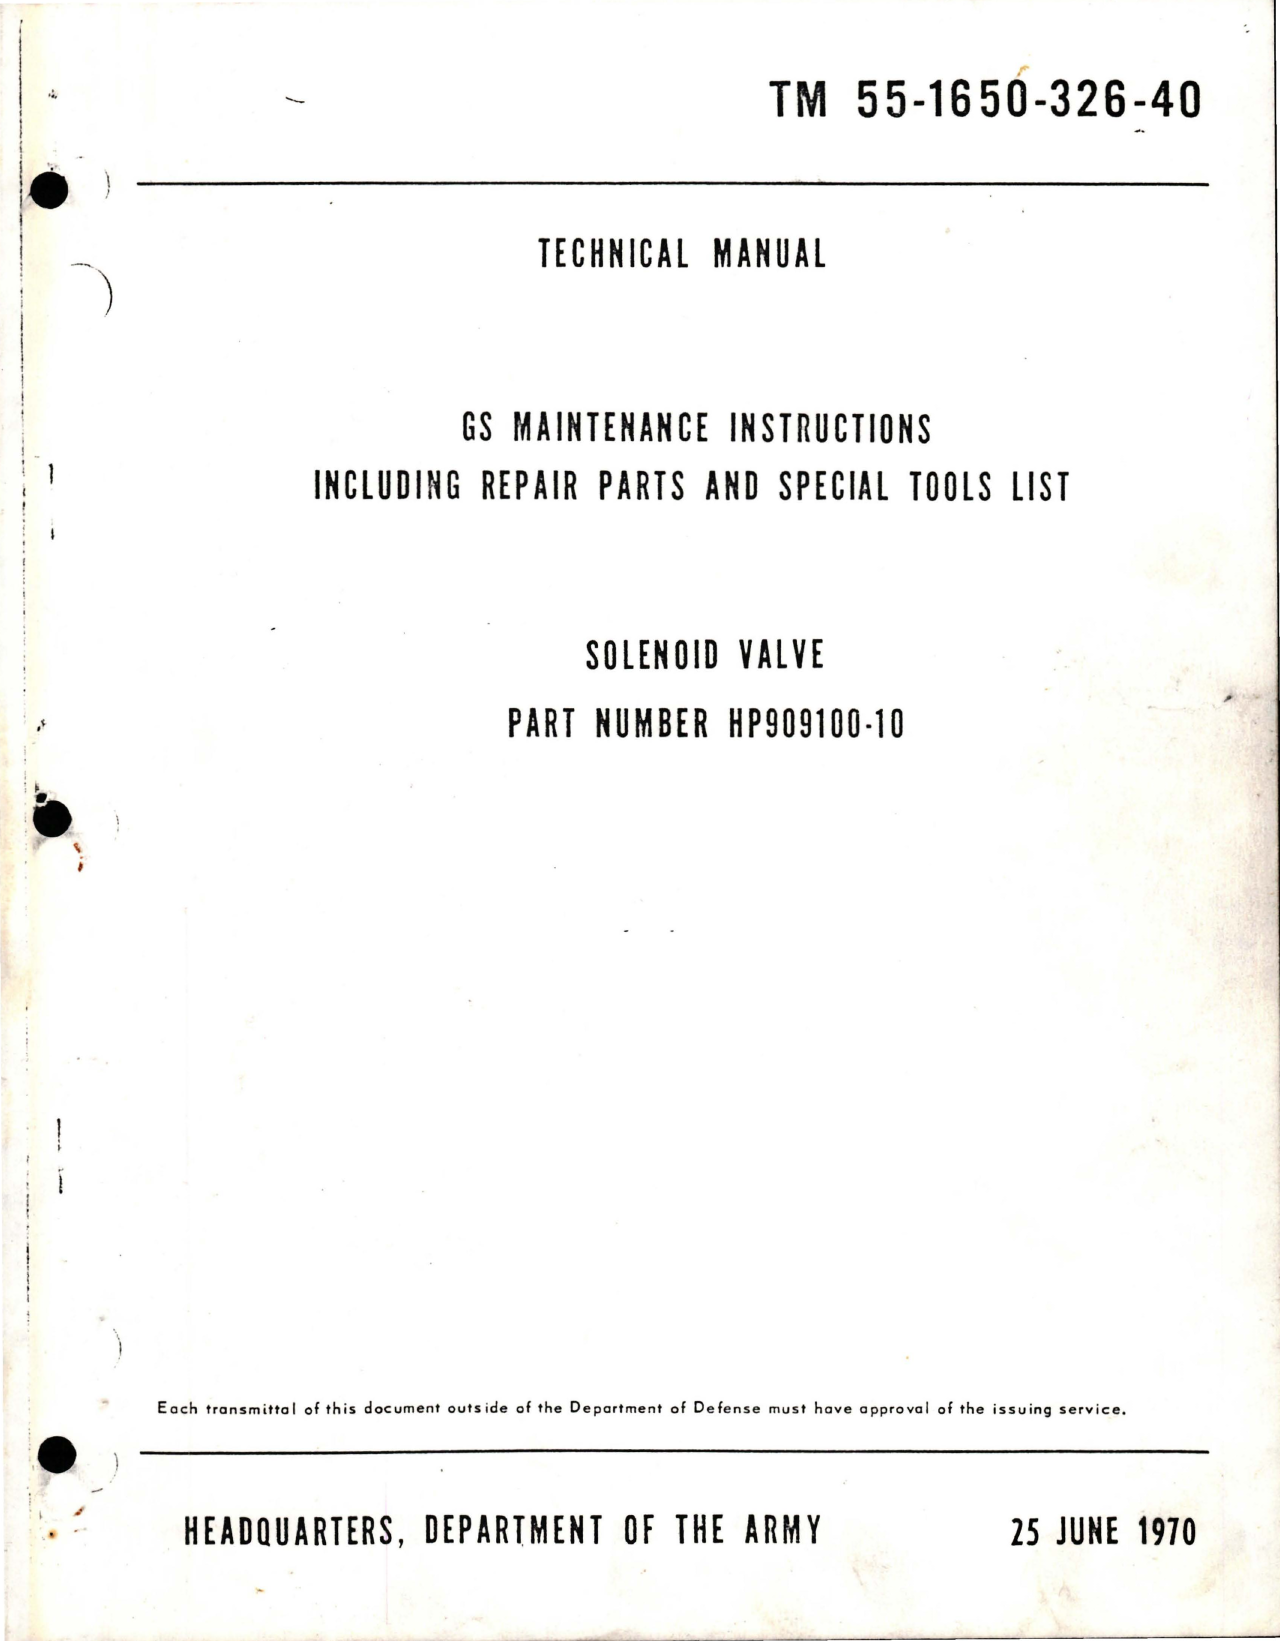 Sample page 1 from AirCorps Library document: Maintenance Instructions for Including Repair Parts and Special Tools List for Solenoid Valve - Part HP909100-10